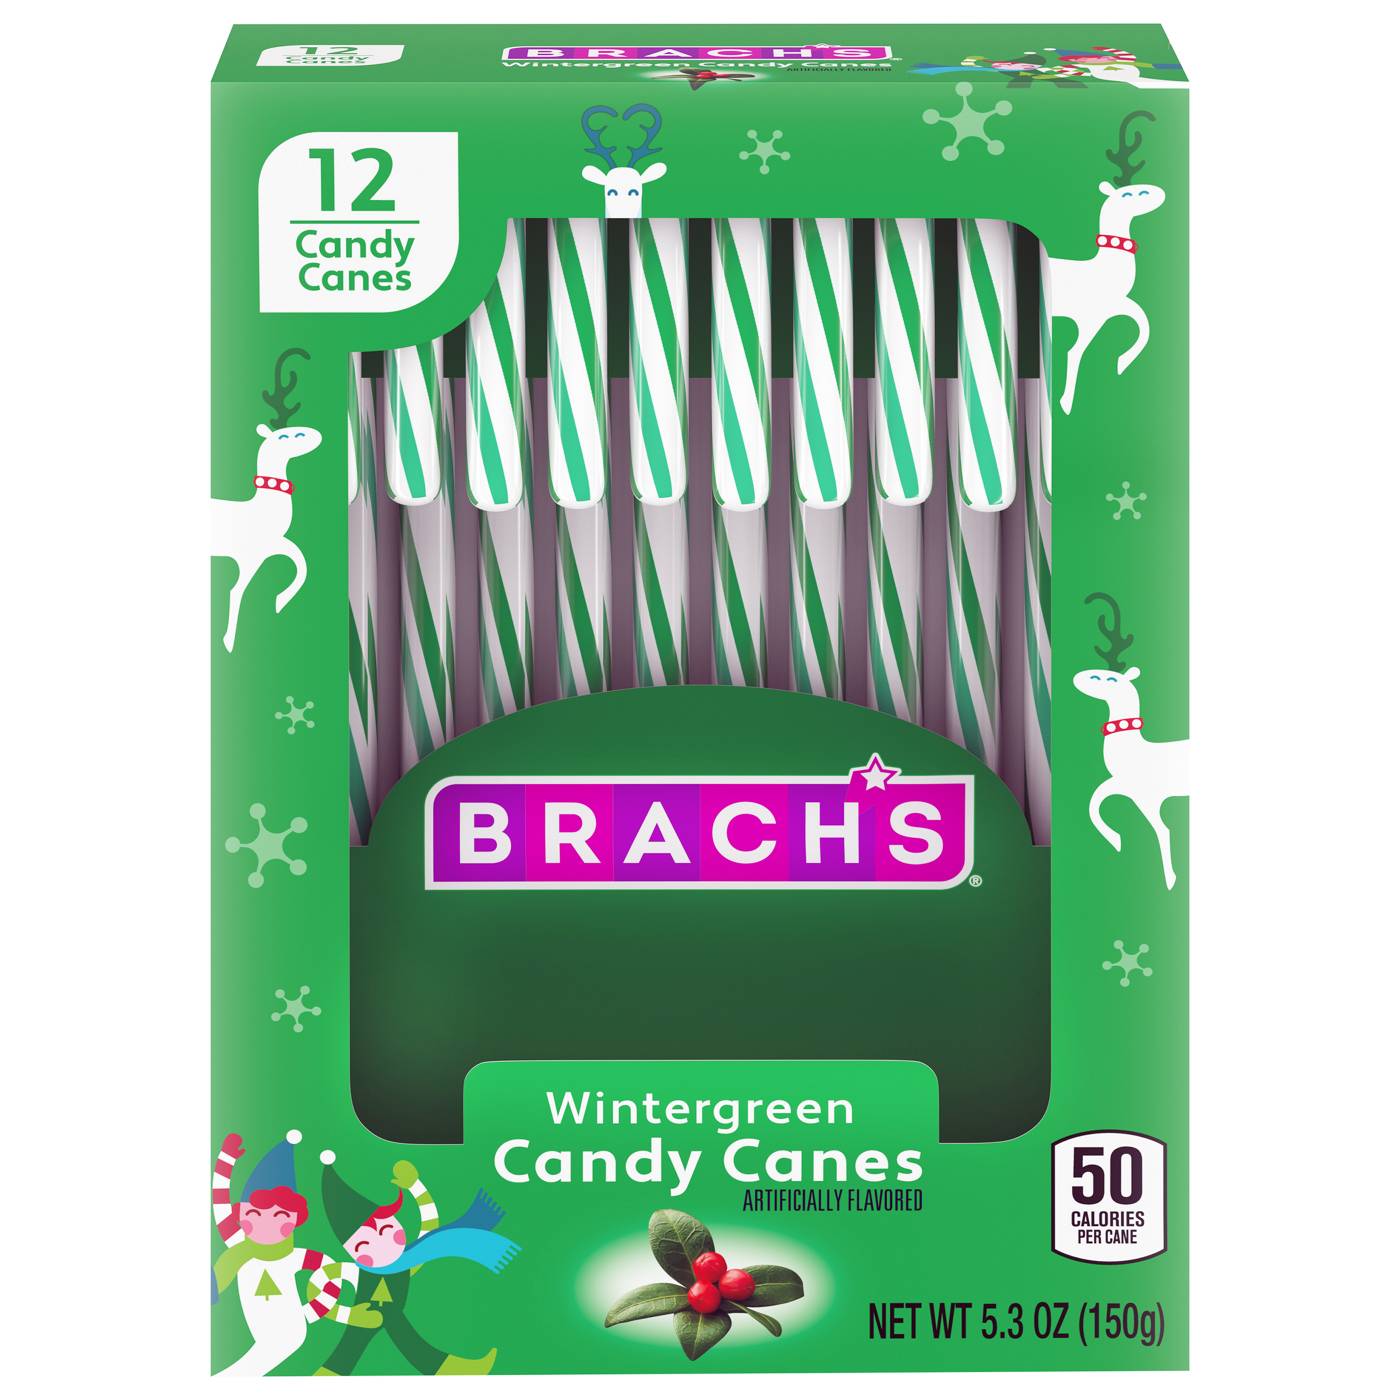 Brach's Wintergreen Flavor Candy Canes; image 1 of 3